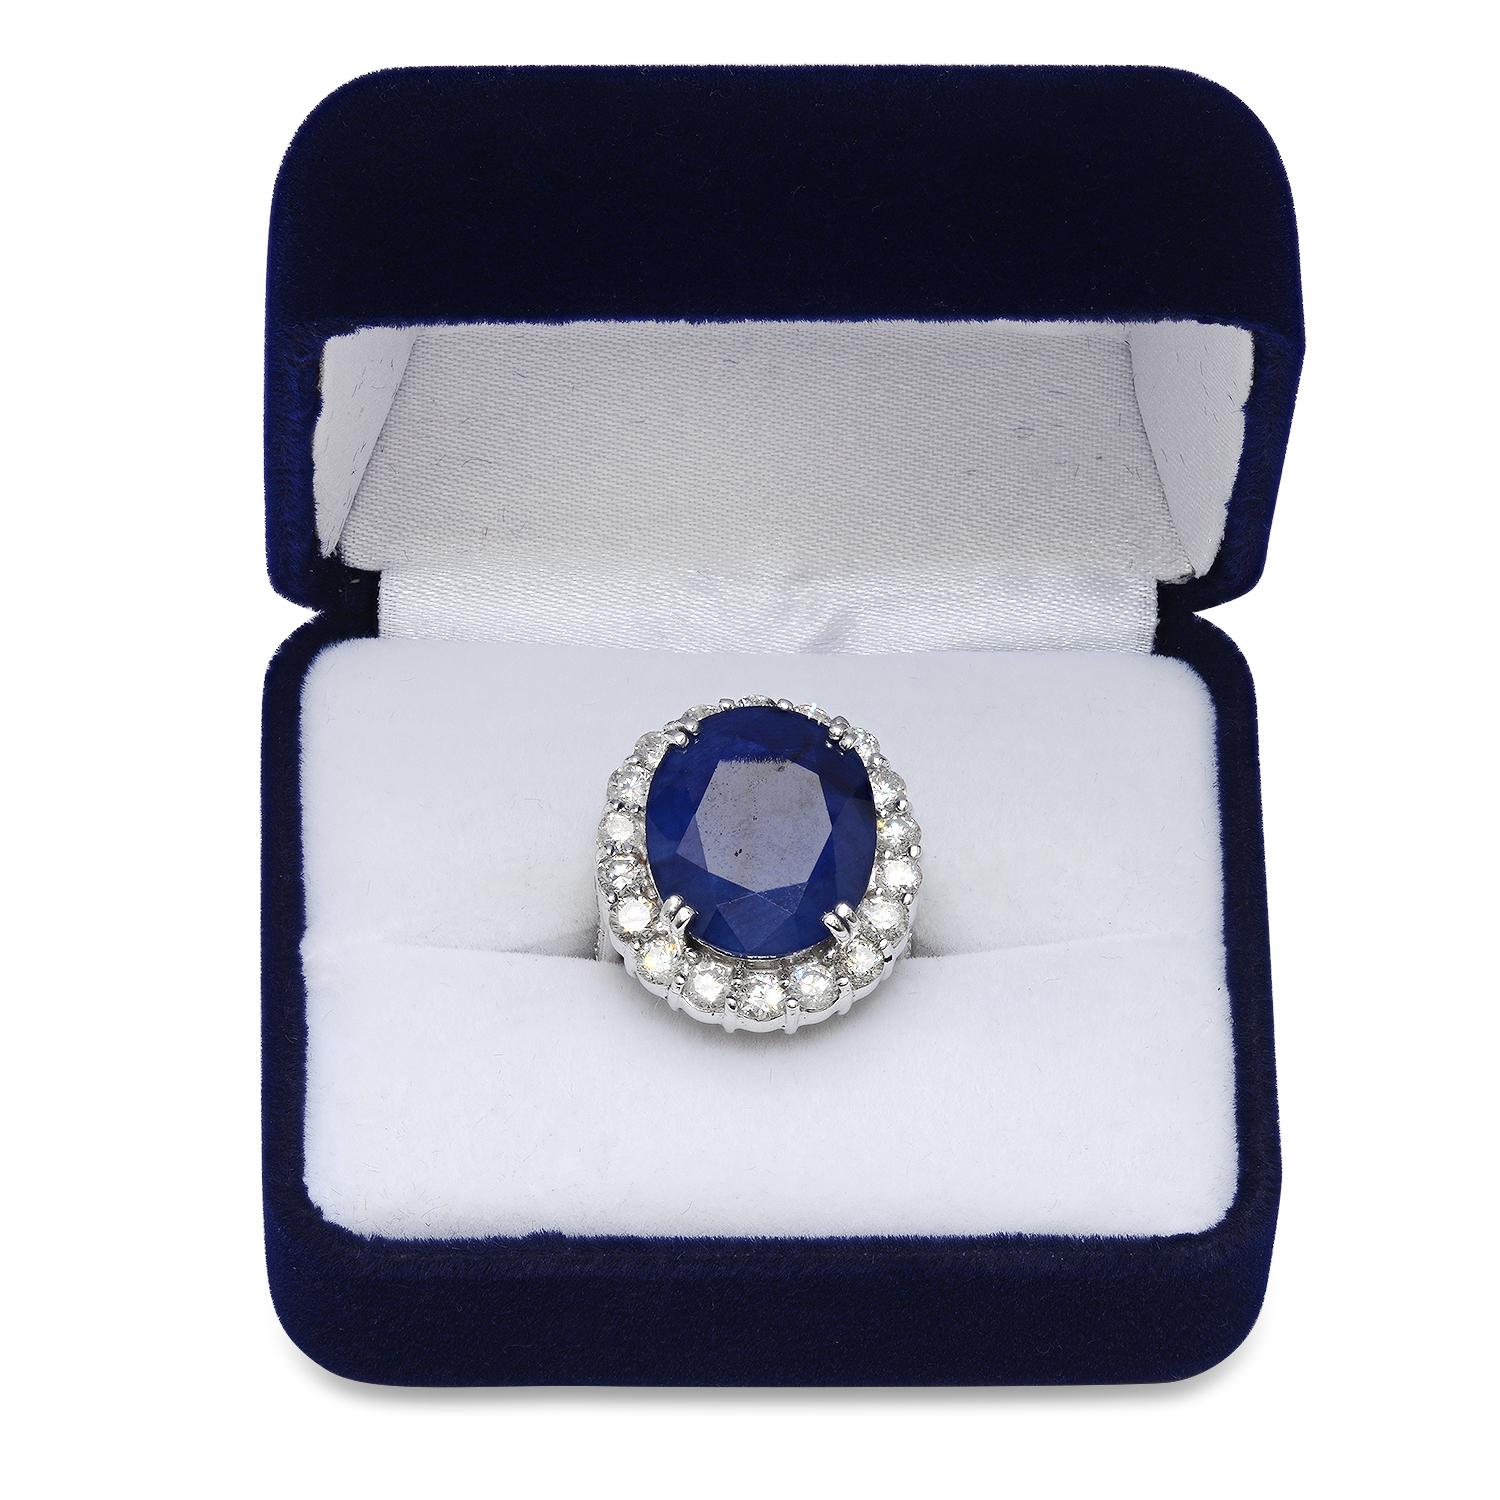 14K White Gold Setting with 20.00ct Sapphire and 3.5ct Diamond Ring